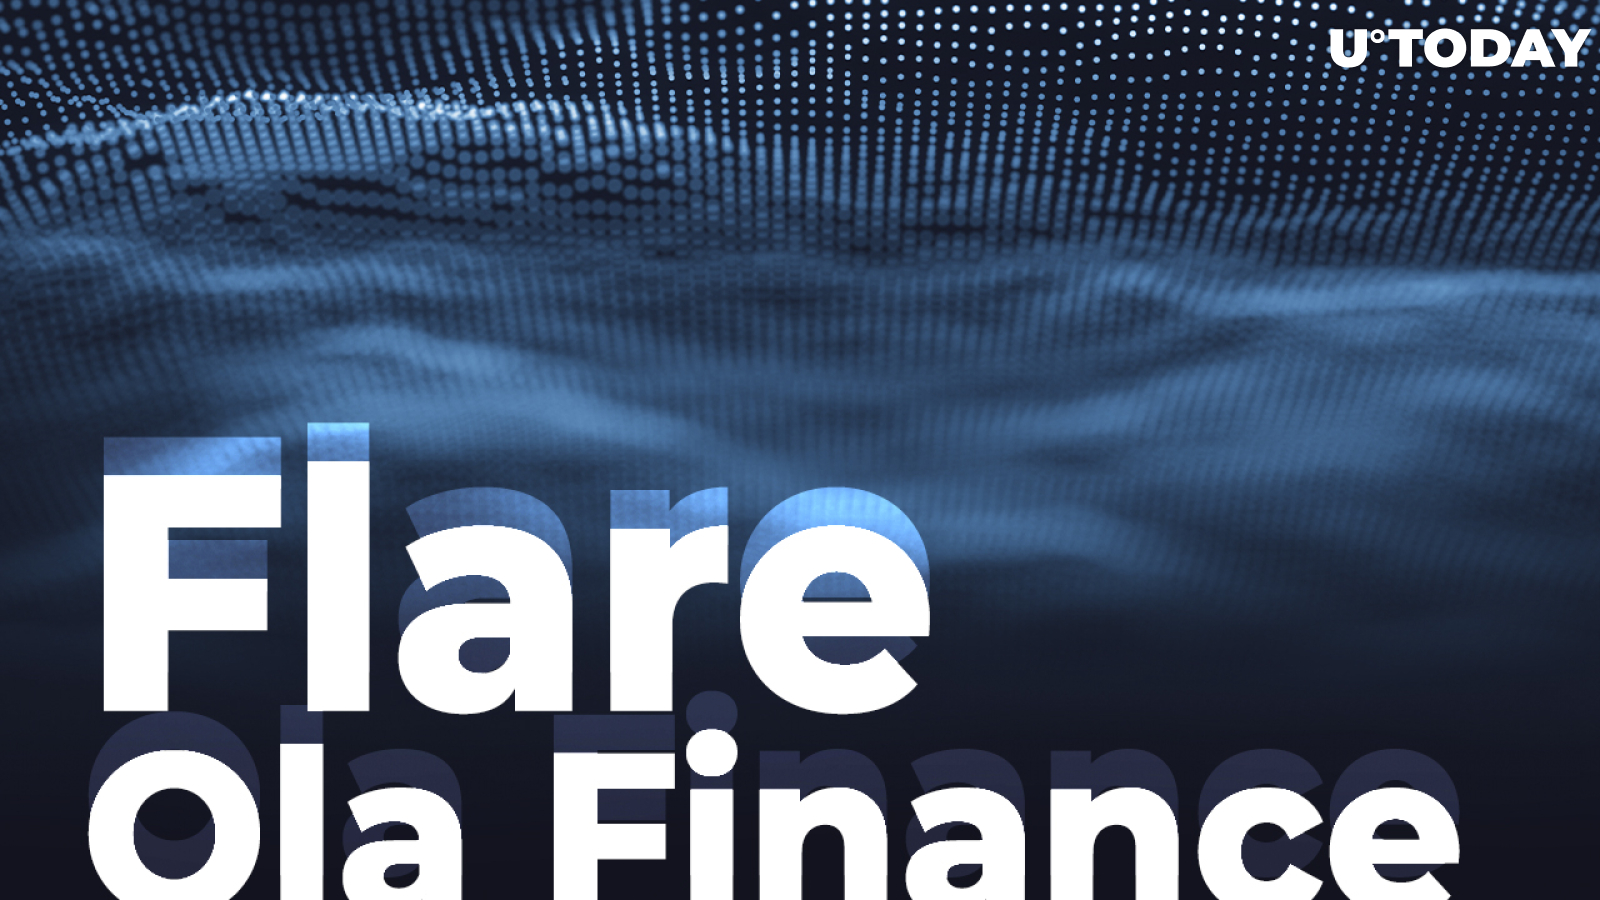 Flare Partners with Ola Finance; Support of First F-Assets Confirmed